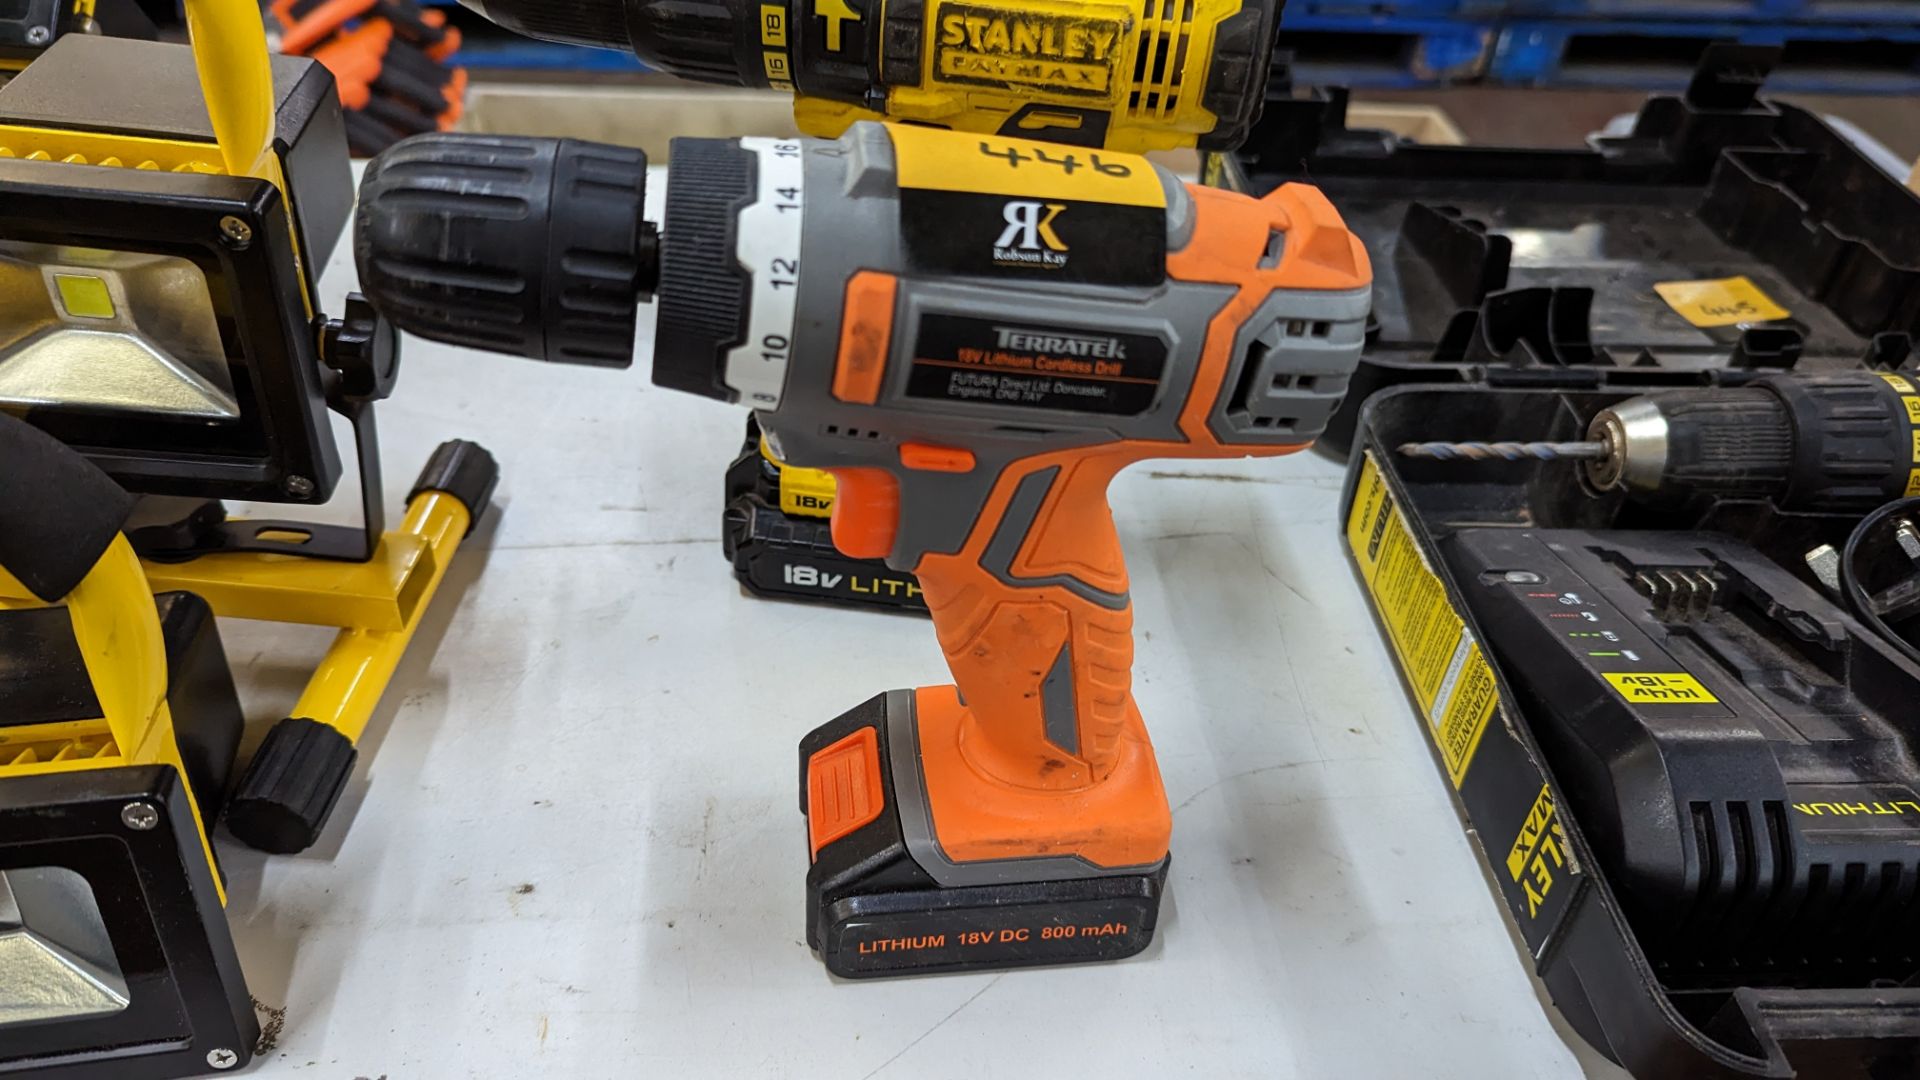 3 off 18 volt lithium cordless drills. Each drill includes an 18 volt lithium battery. This lot do - Image 2 of 7